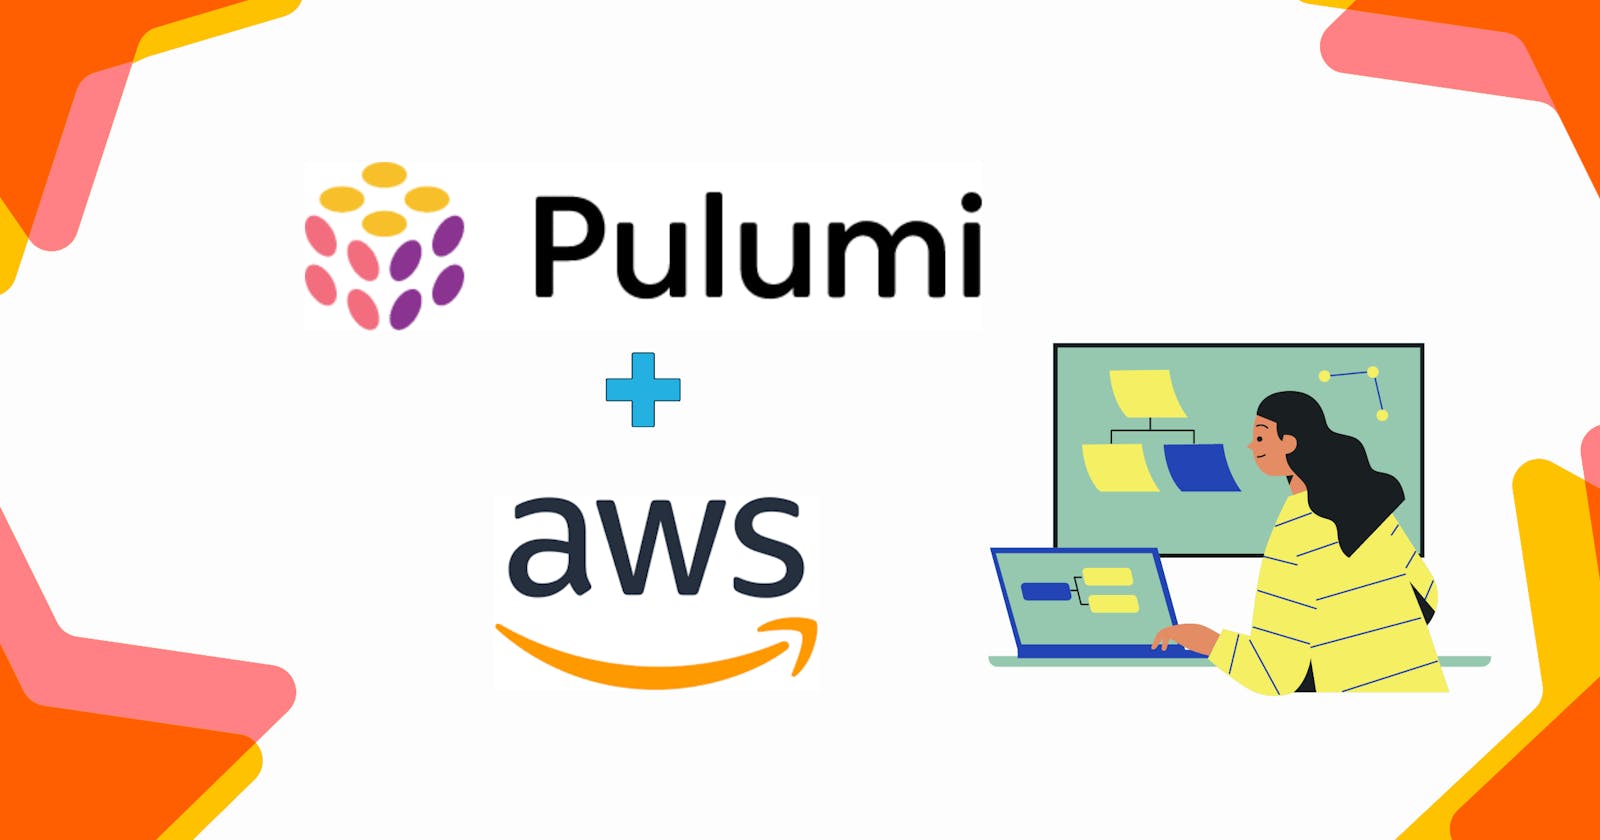 Universal Infrastructure as Code with Pulumi: Simplifying Cloud Development